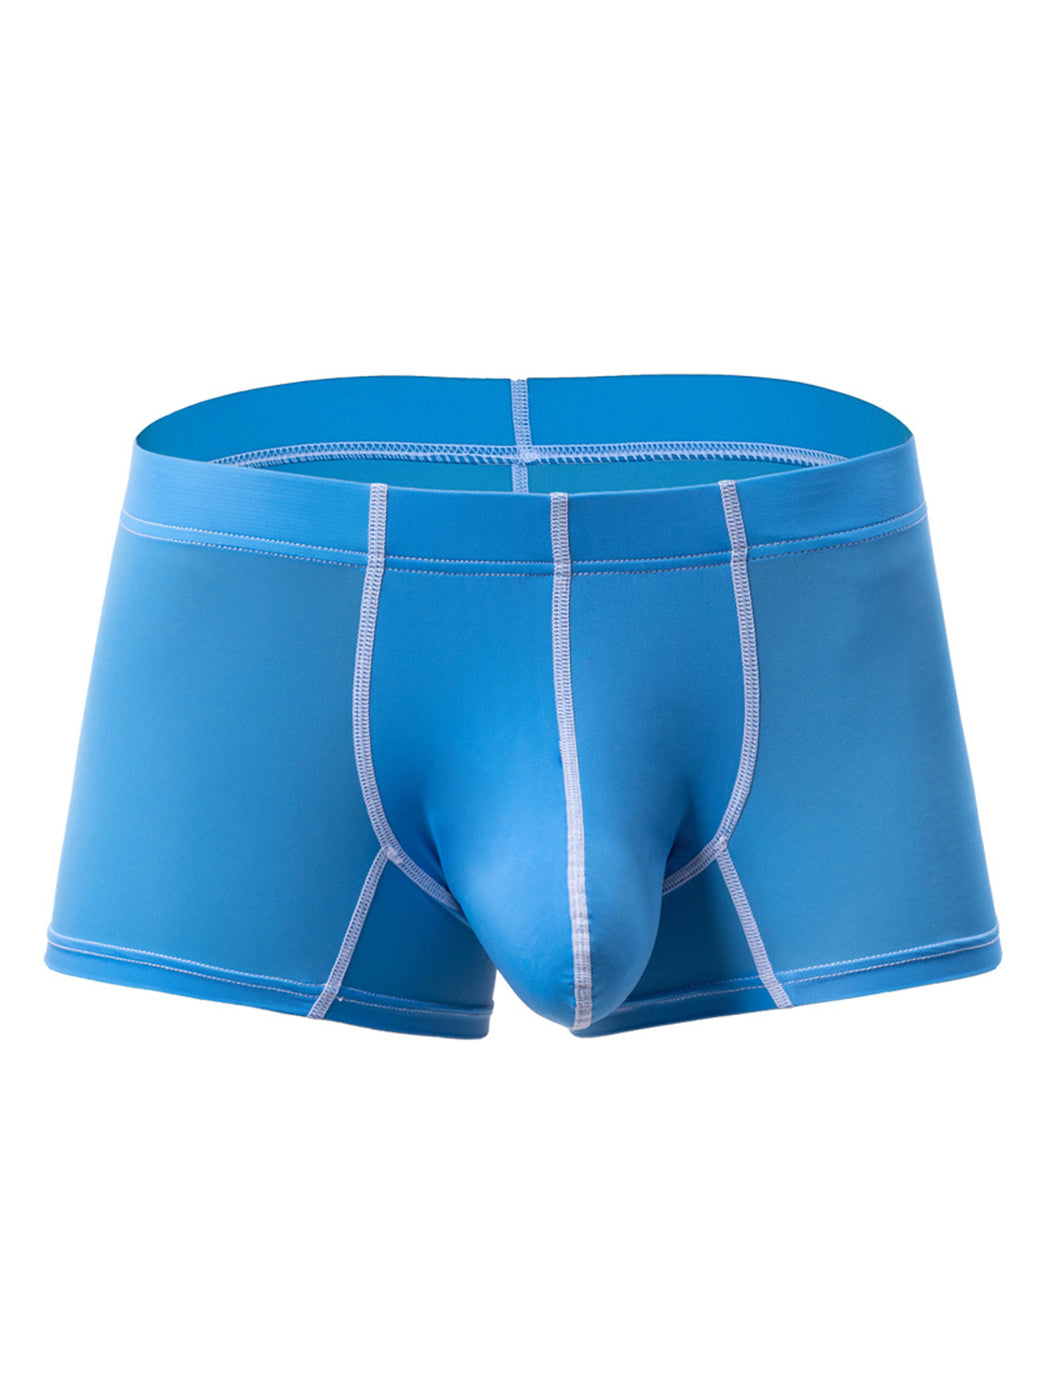 3 Pack Men's Large Pouch Contrast Binding Trunks